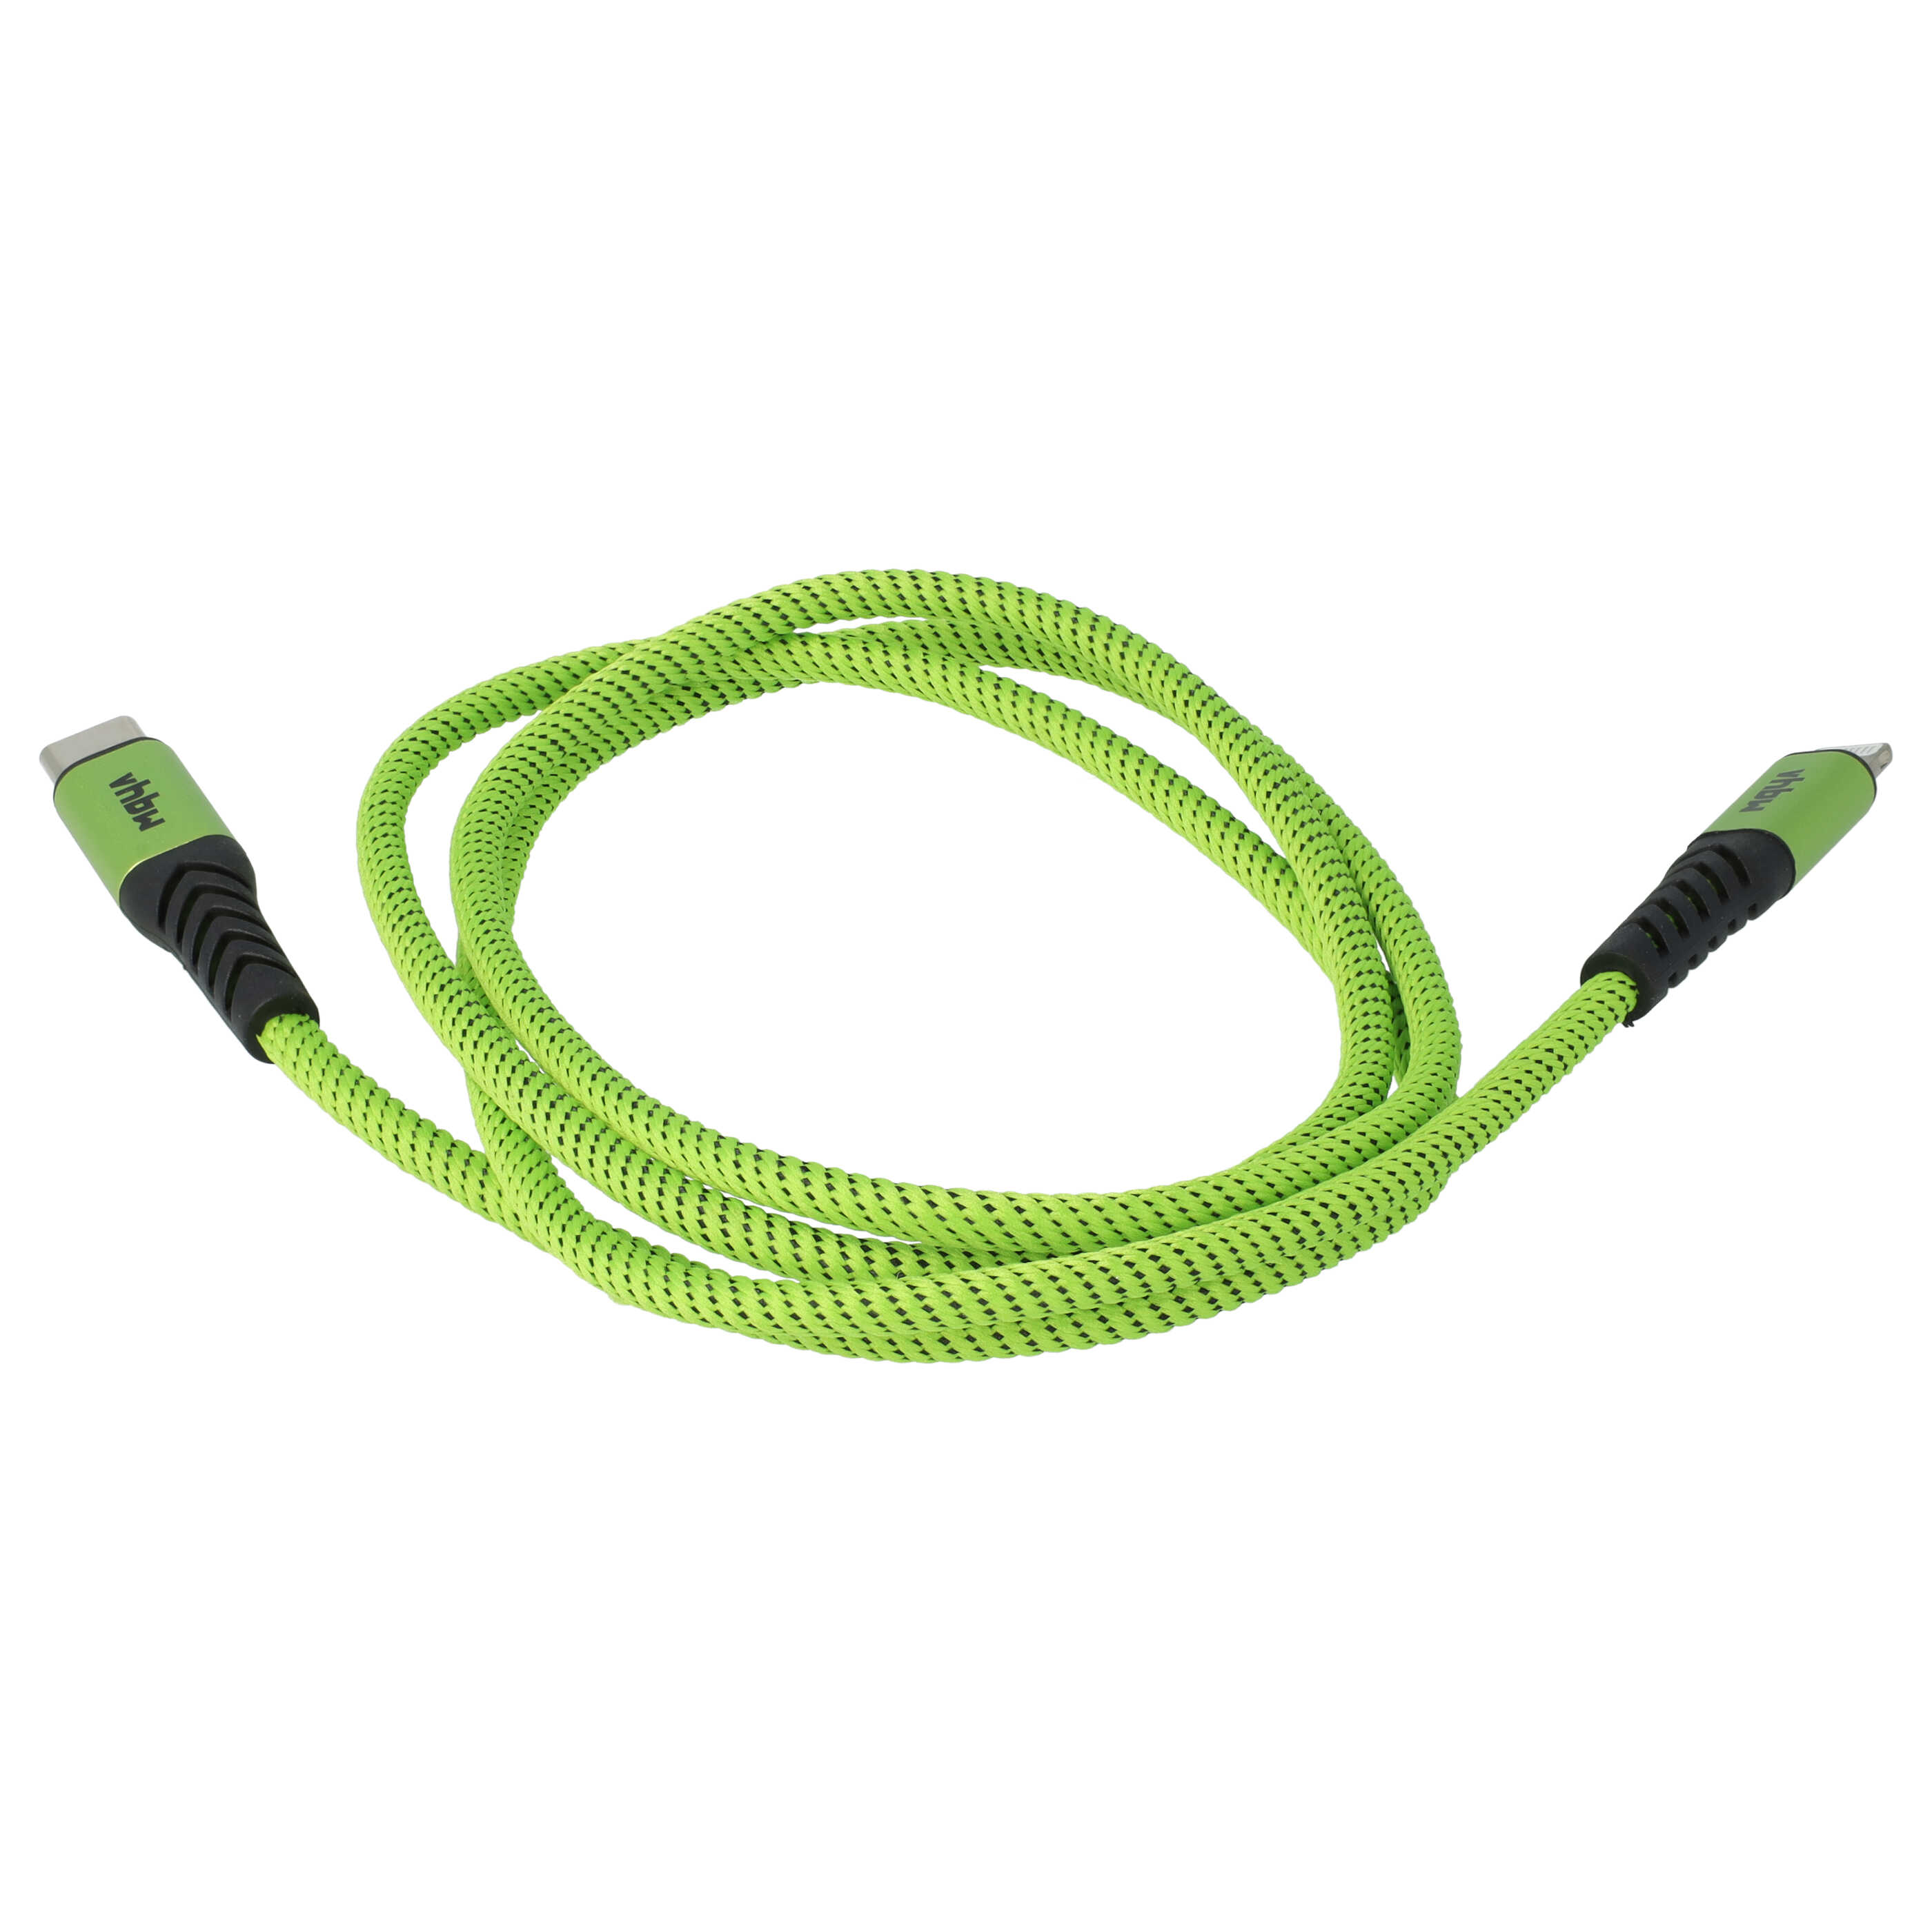 Lightning Cable - USB C, Thunderbolt 3 suitable for 1.Generation Apple iOS - Green Black, 100cm